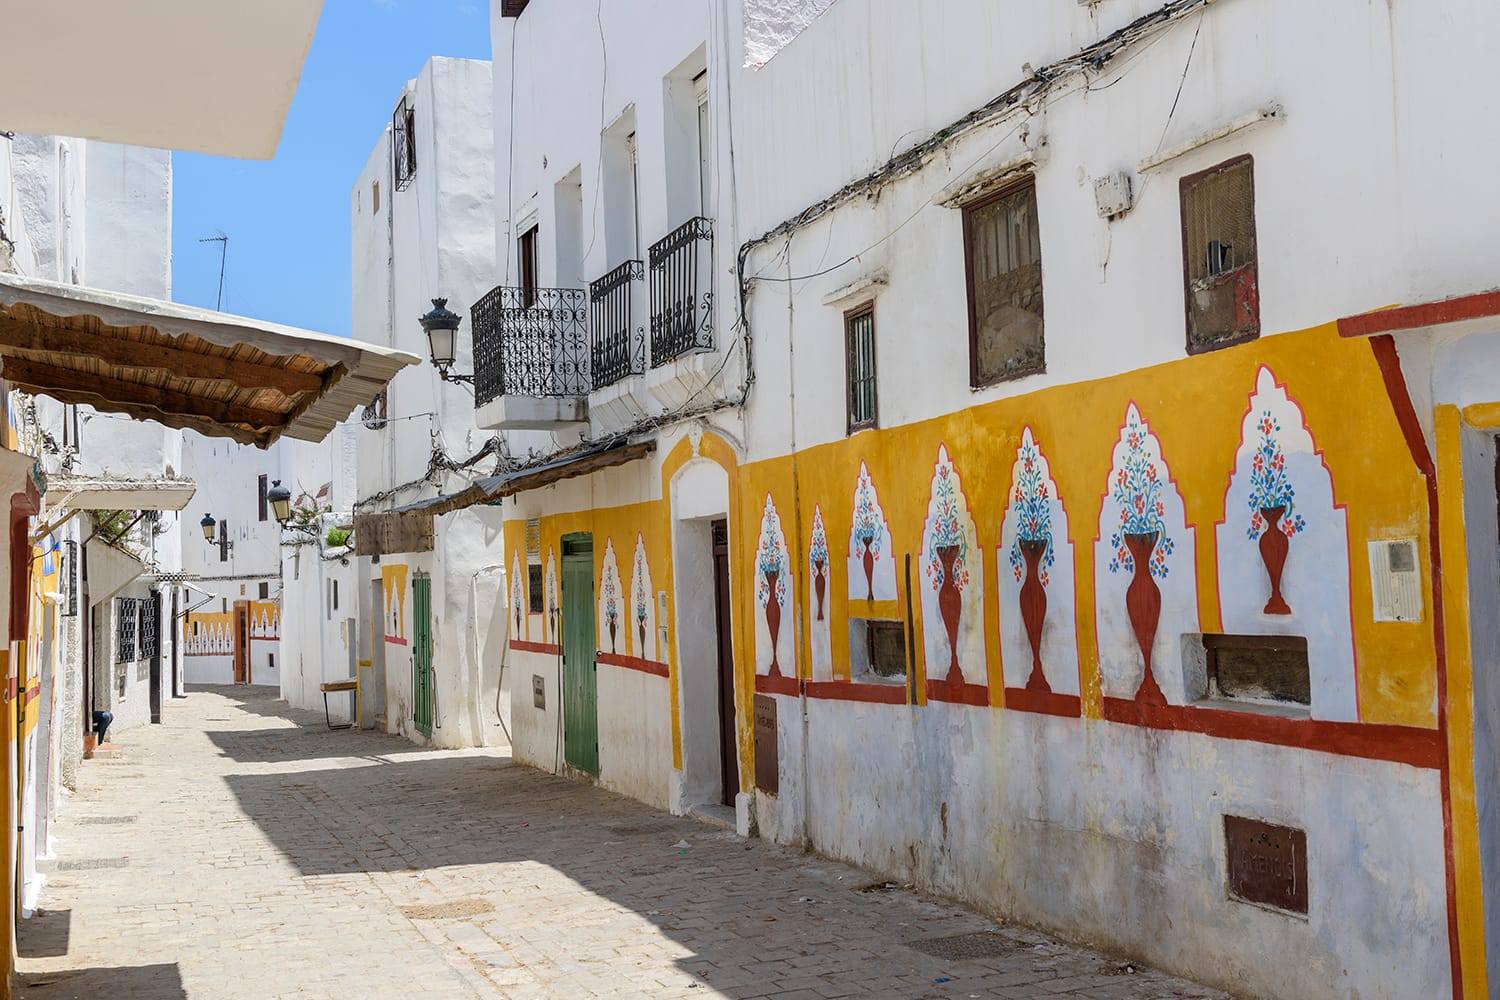 Painted houses in Tetouan, Morocco